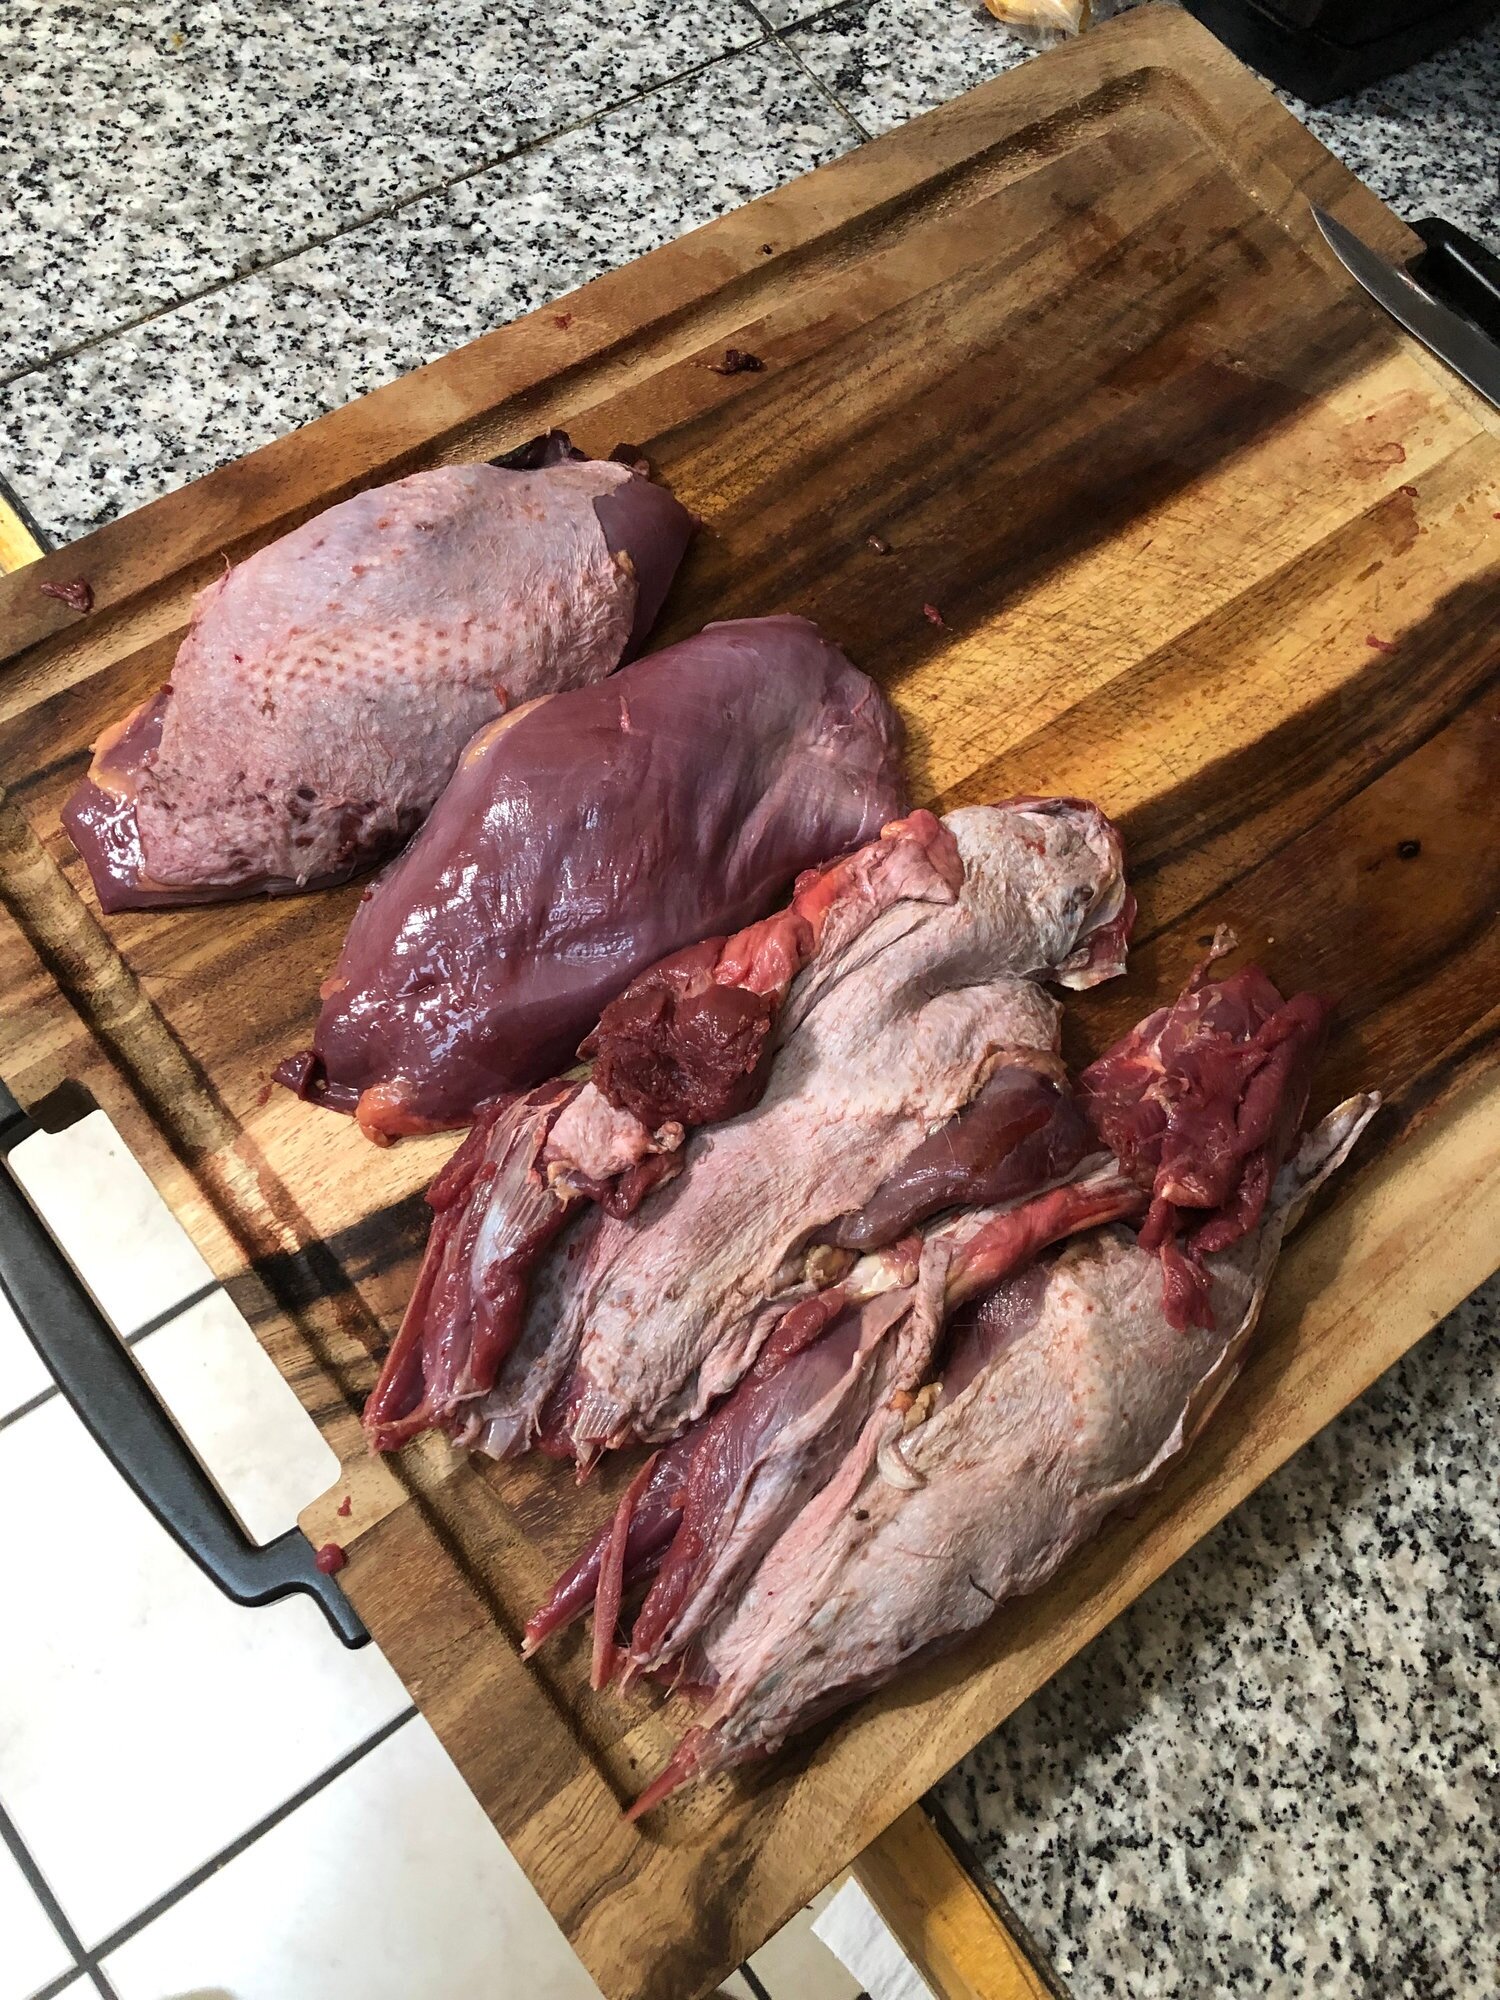  Never-mind the legs/thighs on the right, they look funny but with a little work and some slow cooking they’re a whole lot like turkey legs. But they aren’t the focus of this article. The breasts are great for one adult each and taste like a mixture 